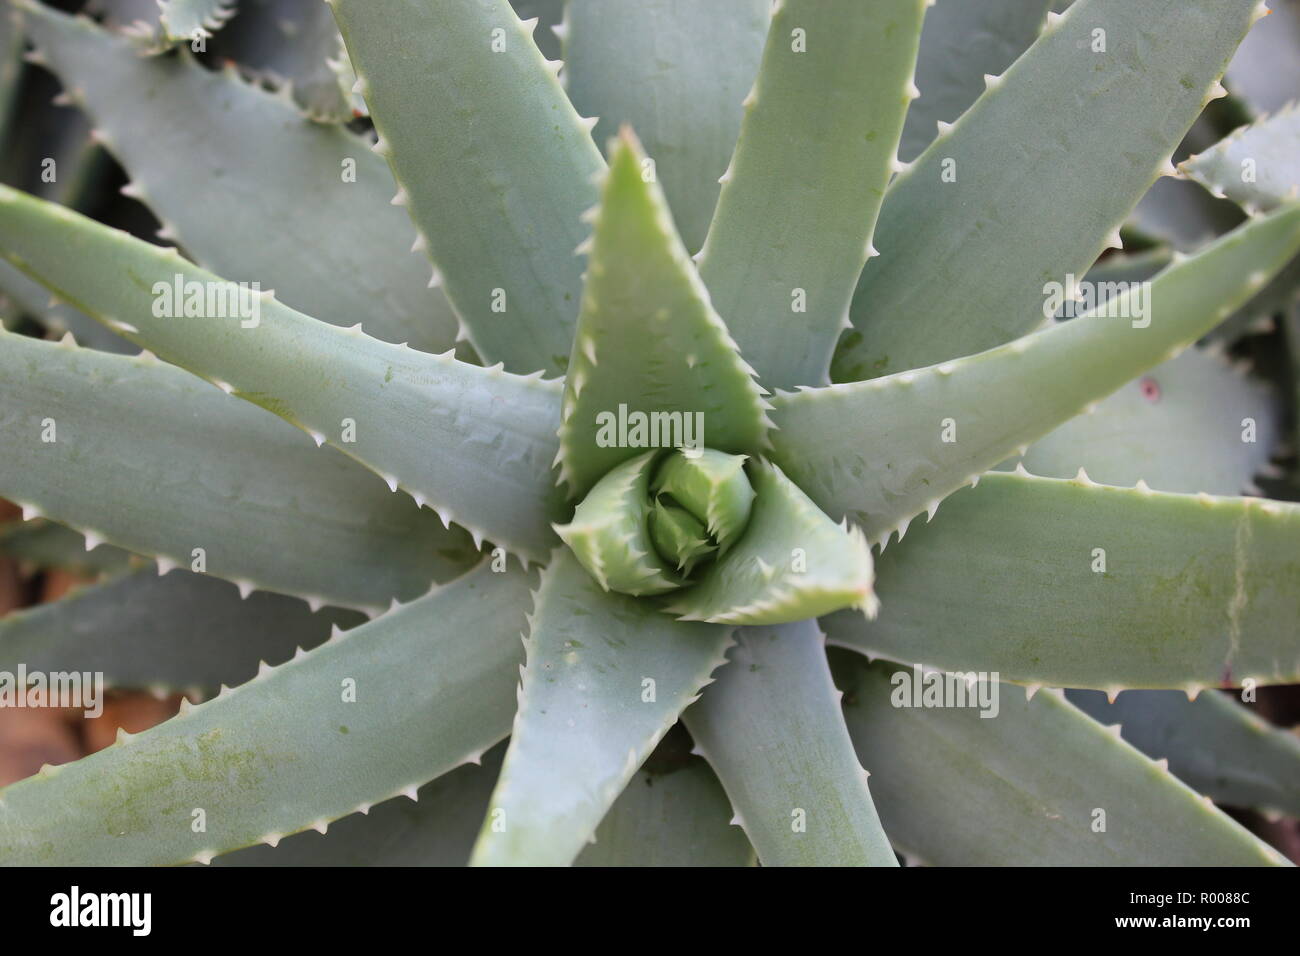 Indian Aloe High Resolution Stock Photography and Images - Alamy